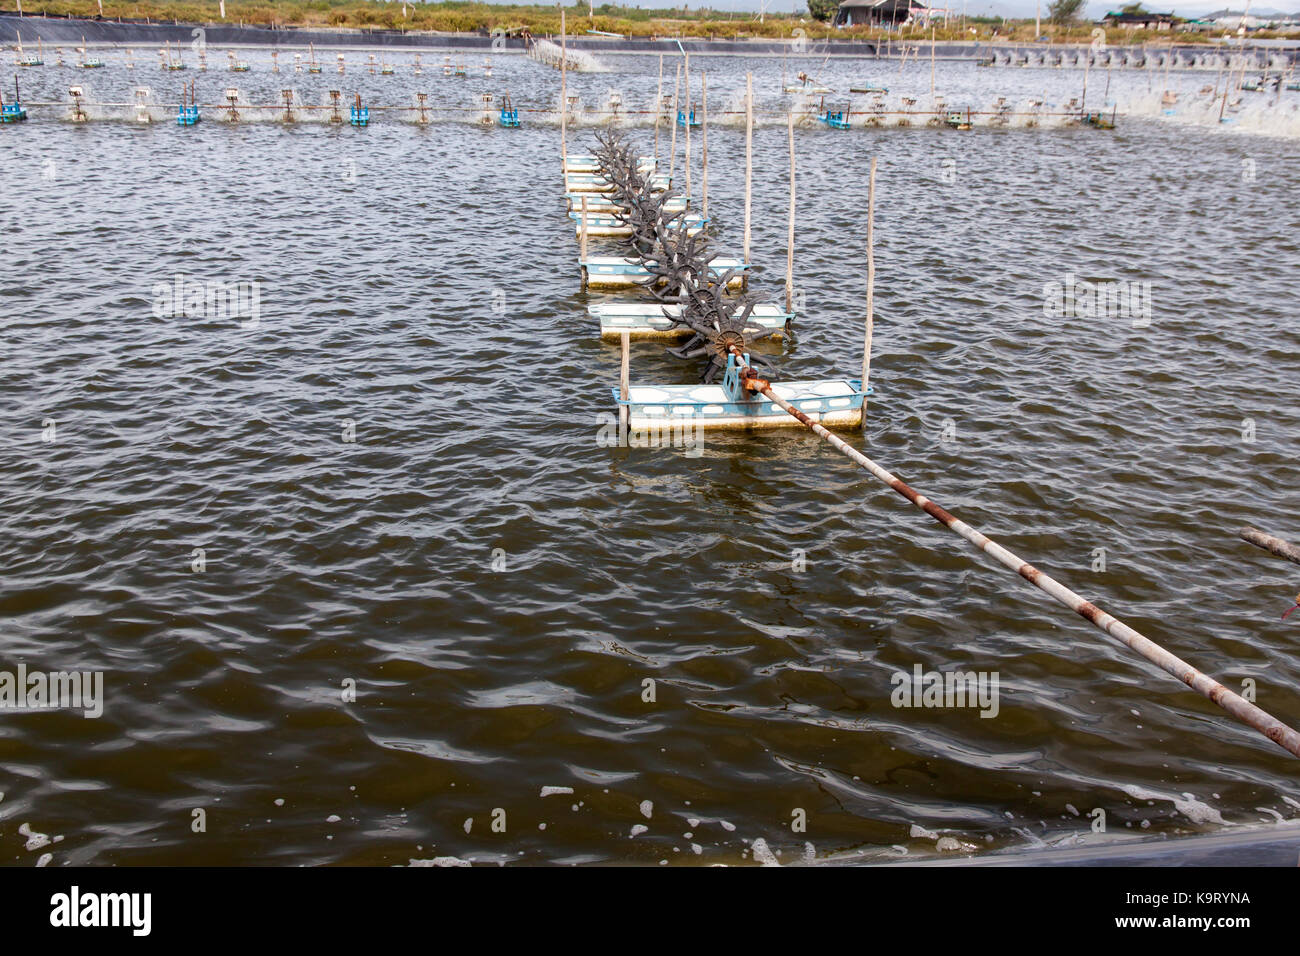 Paddle wheel aerator in Shrimp farming closed system. Supplying the Water with Fresh Oxygen. Natural Water Treatment. Stock Photo